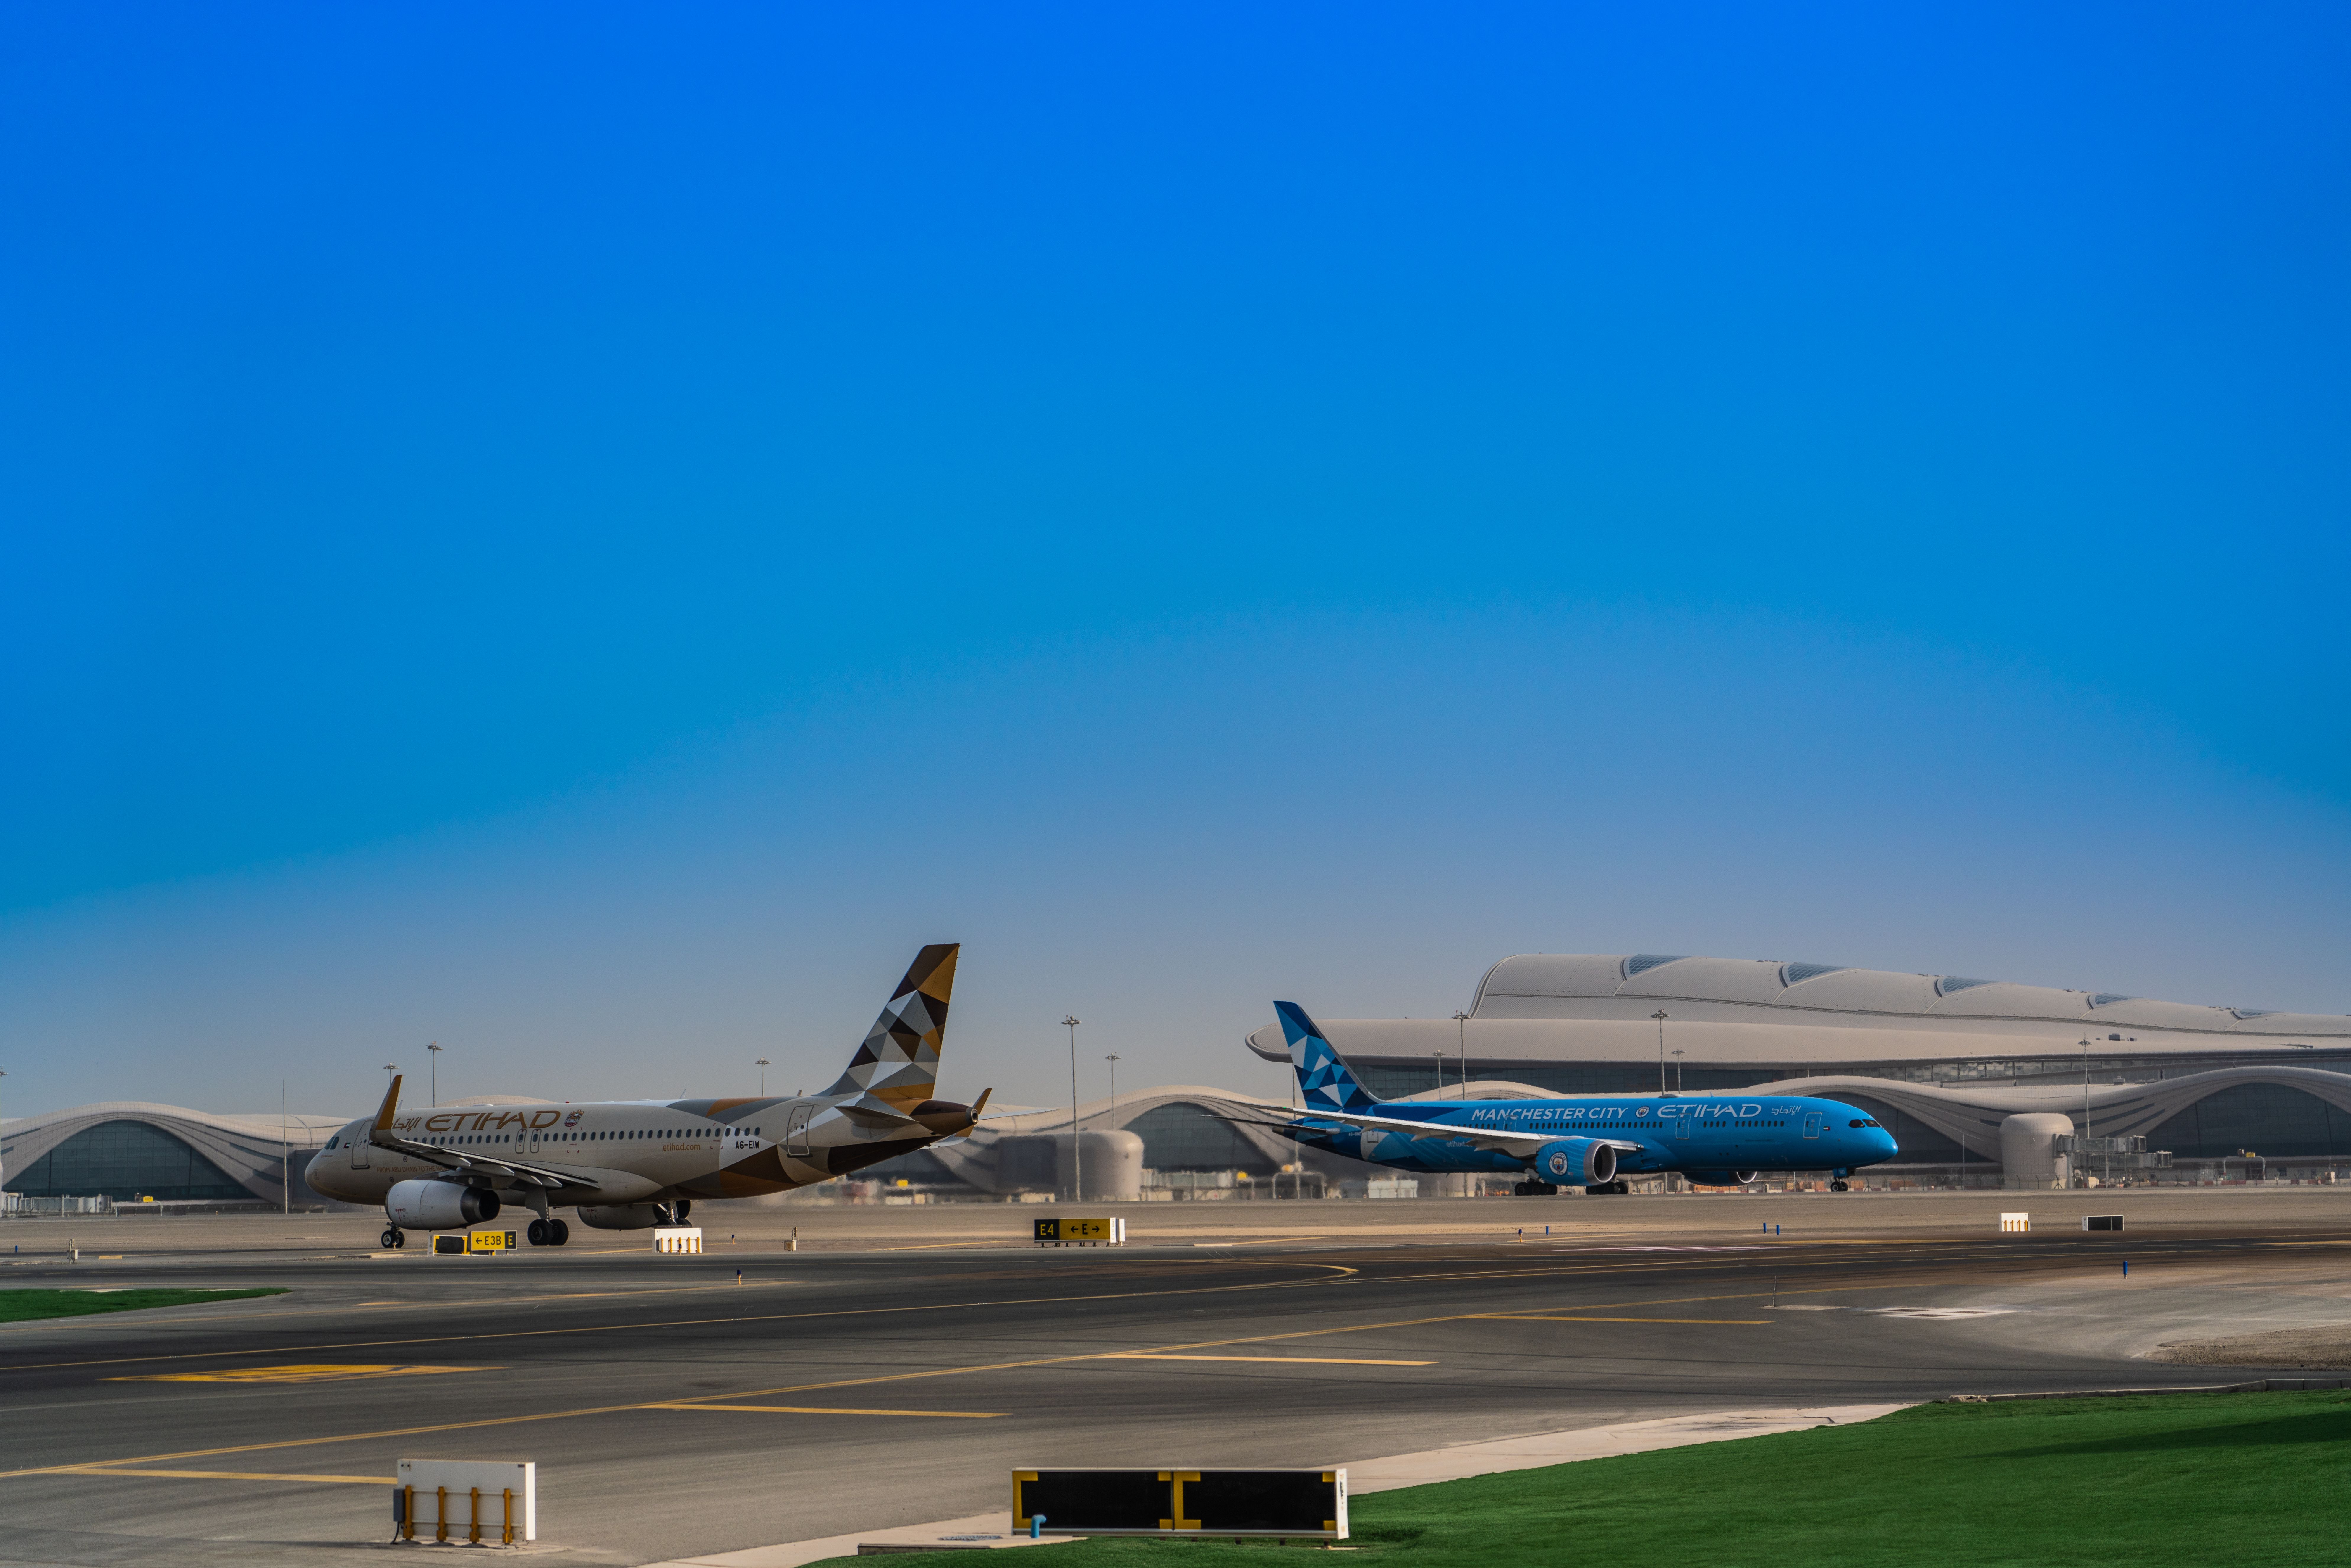 Etihad Airbus A320 and 787 Dreamliner in special livery at Abu Dhabi International Airport.